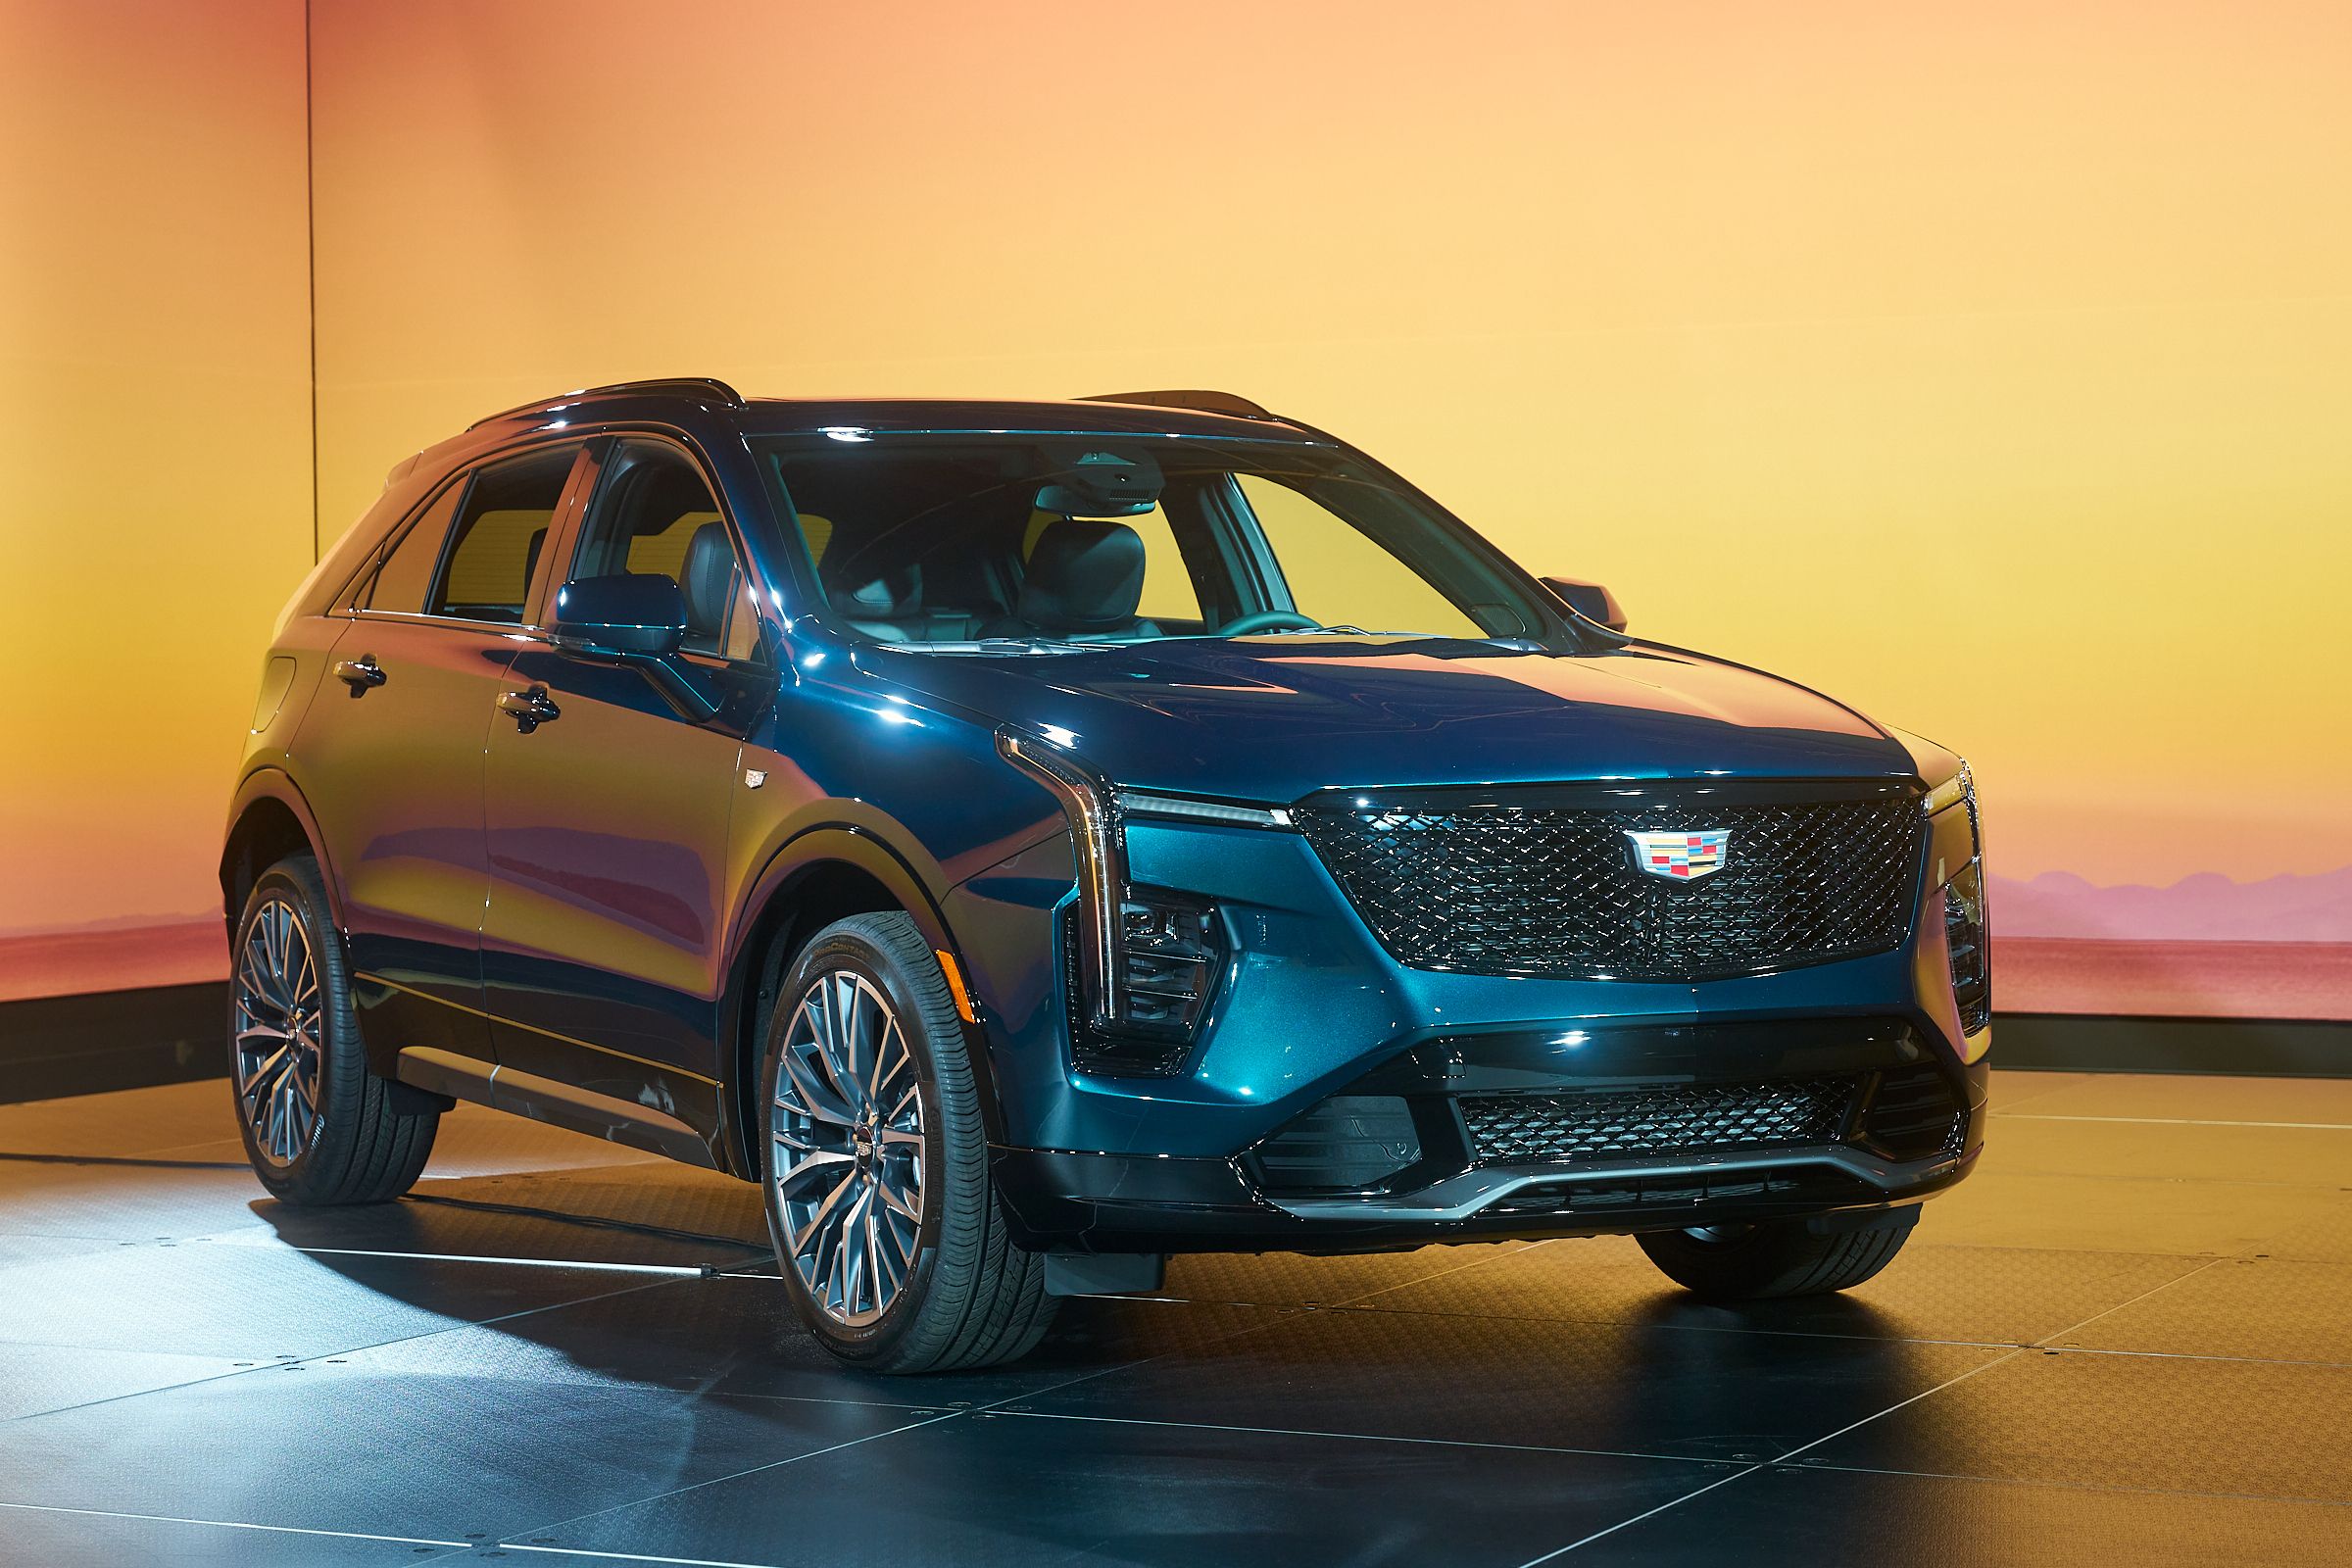 Cadillac Is Charging 1,200 To Unlock 74 More LbFt Of Torque On the